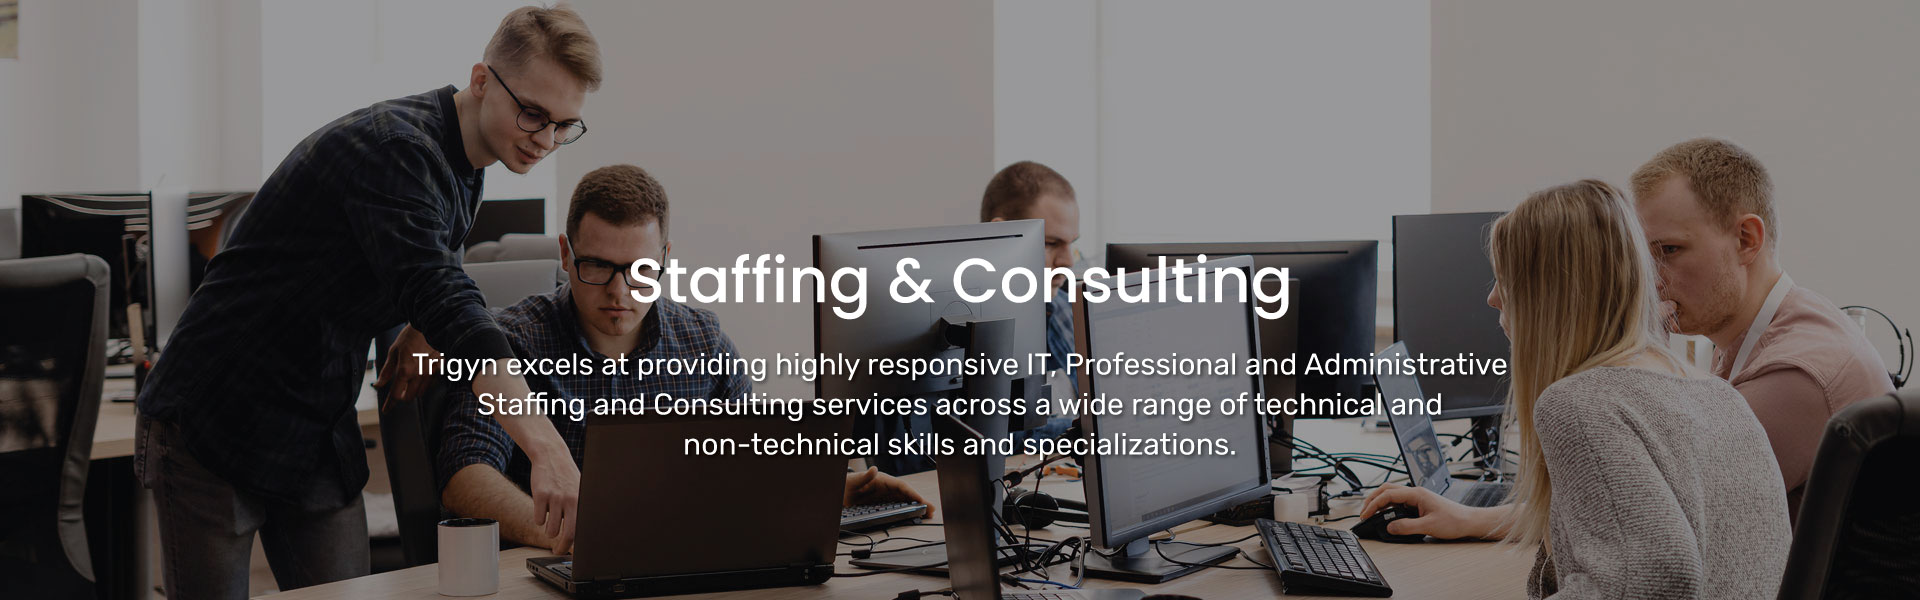 Trigyn's Staffing & Consulting Services